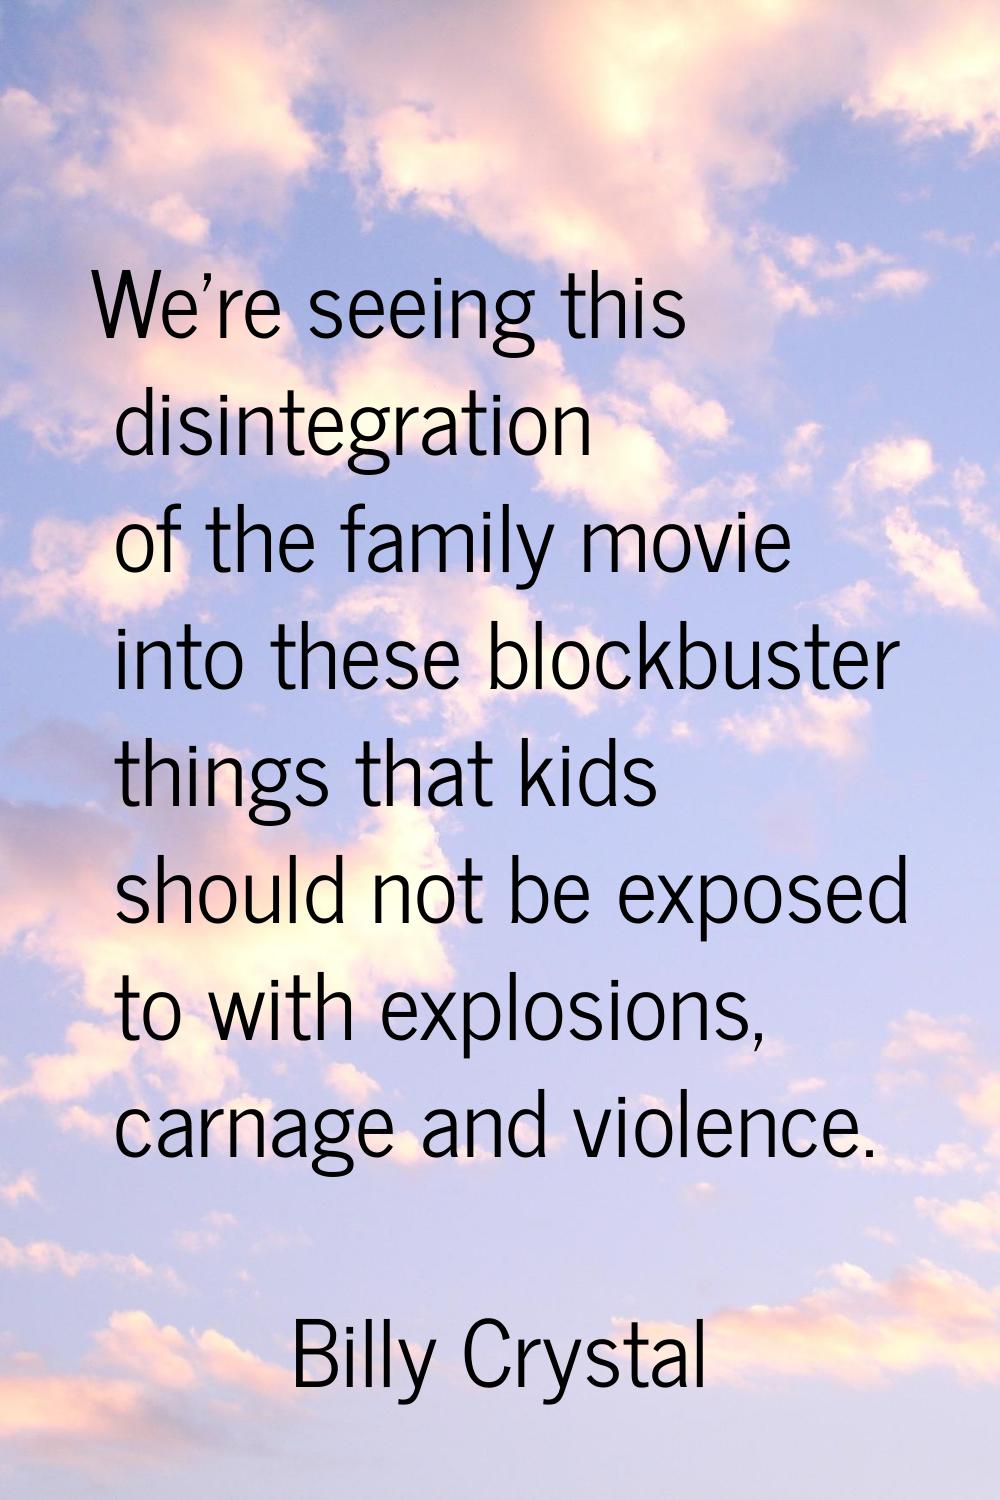 We're seeing this disintegration of the family movie into these blockbuster things that kids should